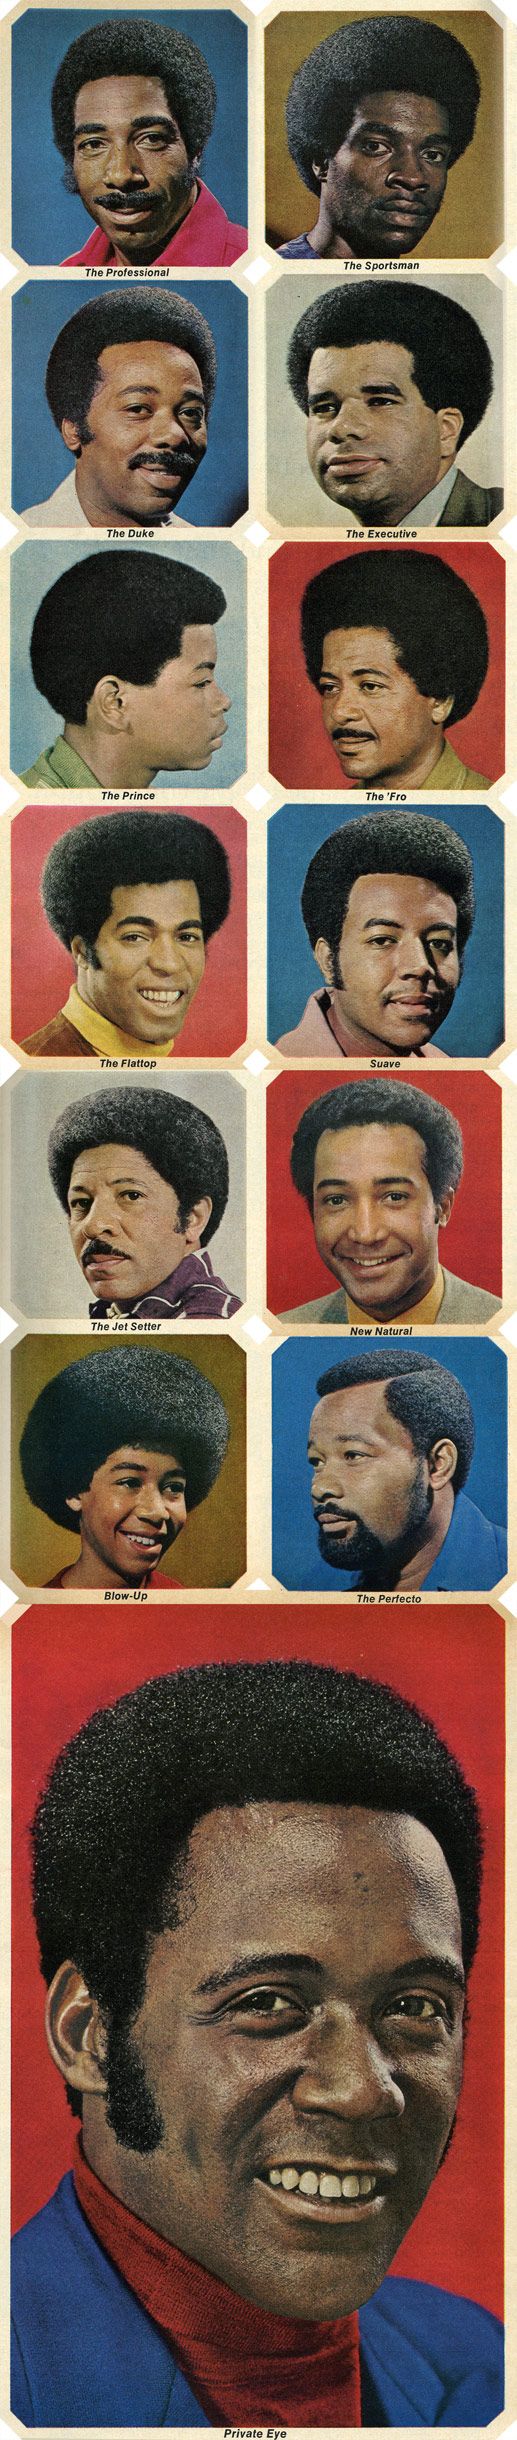 Choose Your Retro Haircut! Hair Style Selections from the 1950s-1980s -  Flashbak